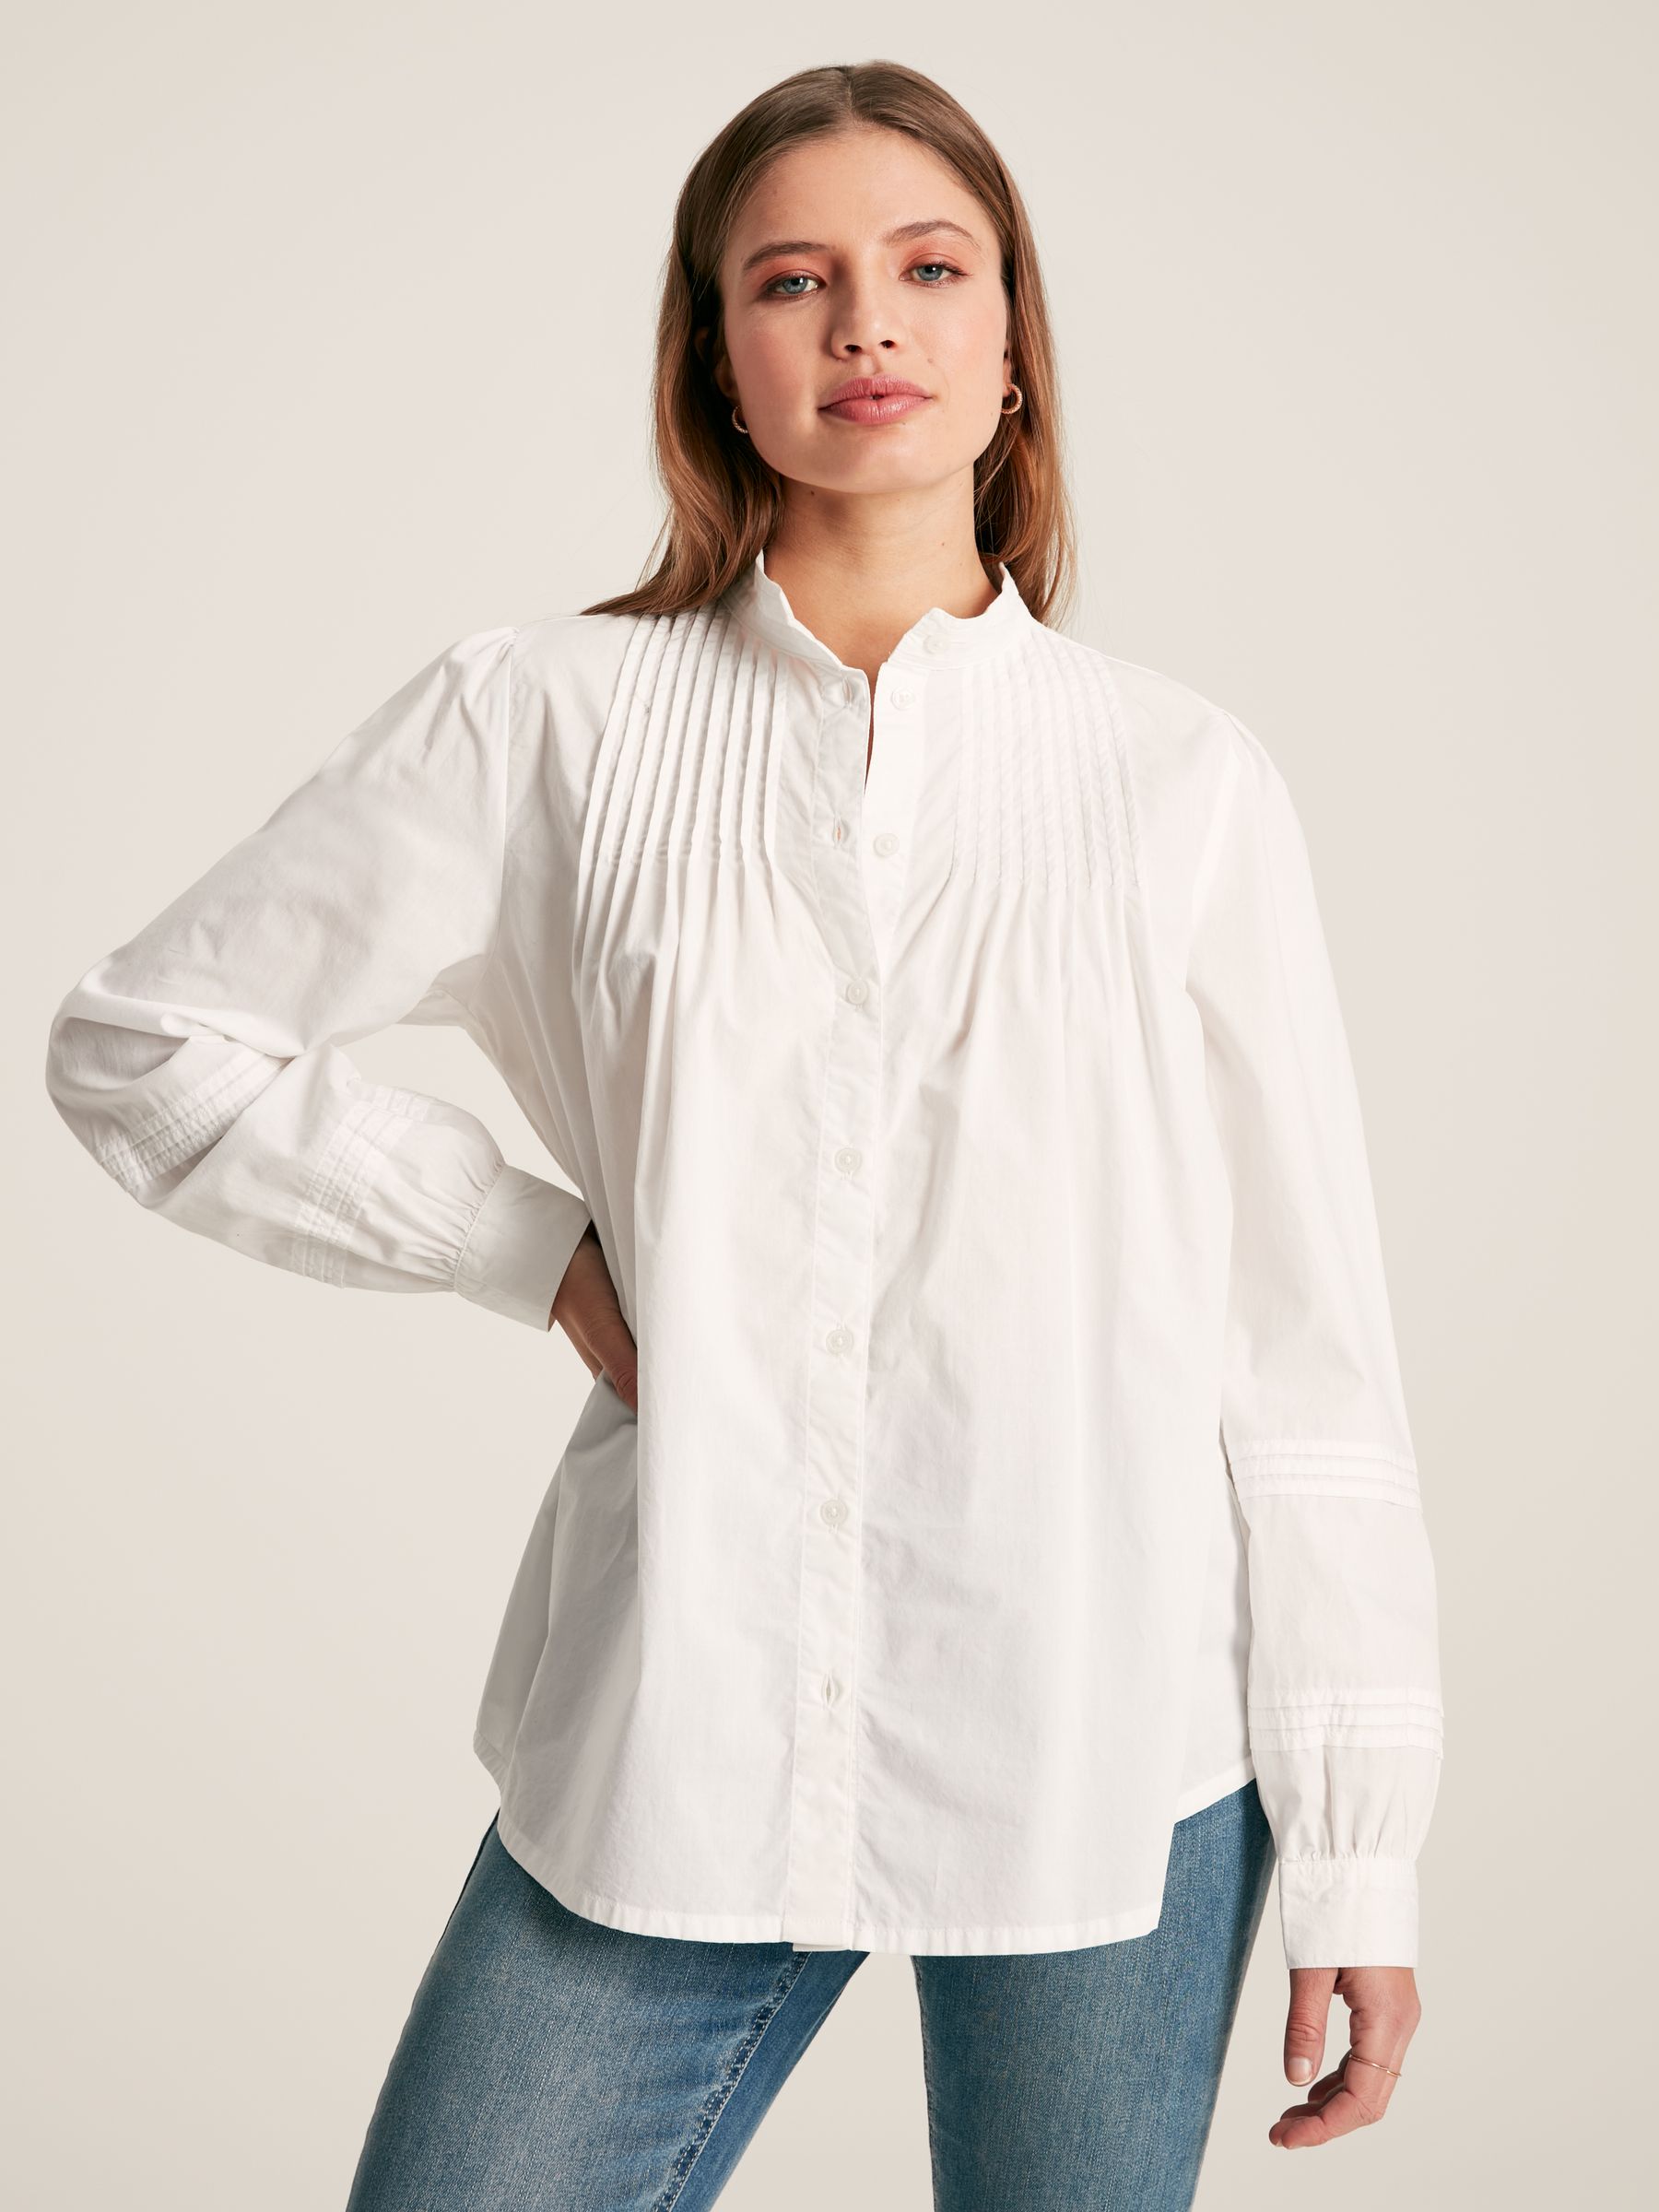 Buy Arabella Chalk White Pleated Blouse from the Joules online shop